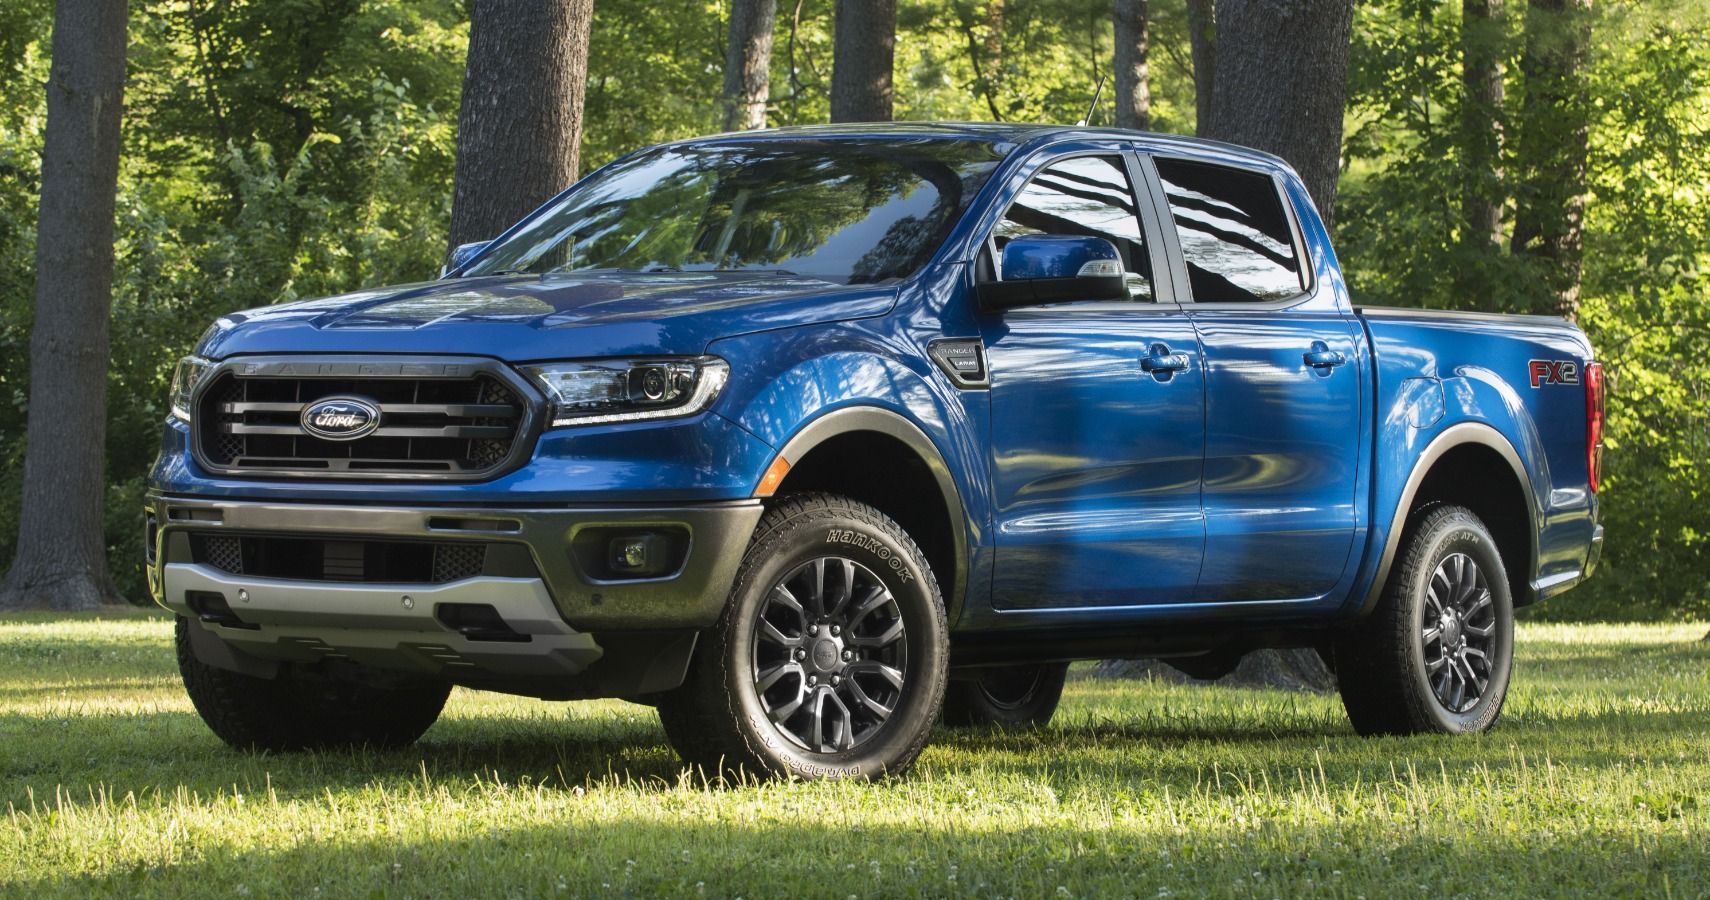 The 2019 Ford Ranger in nature.